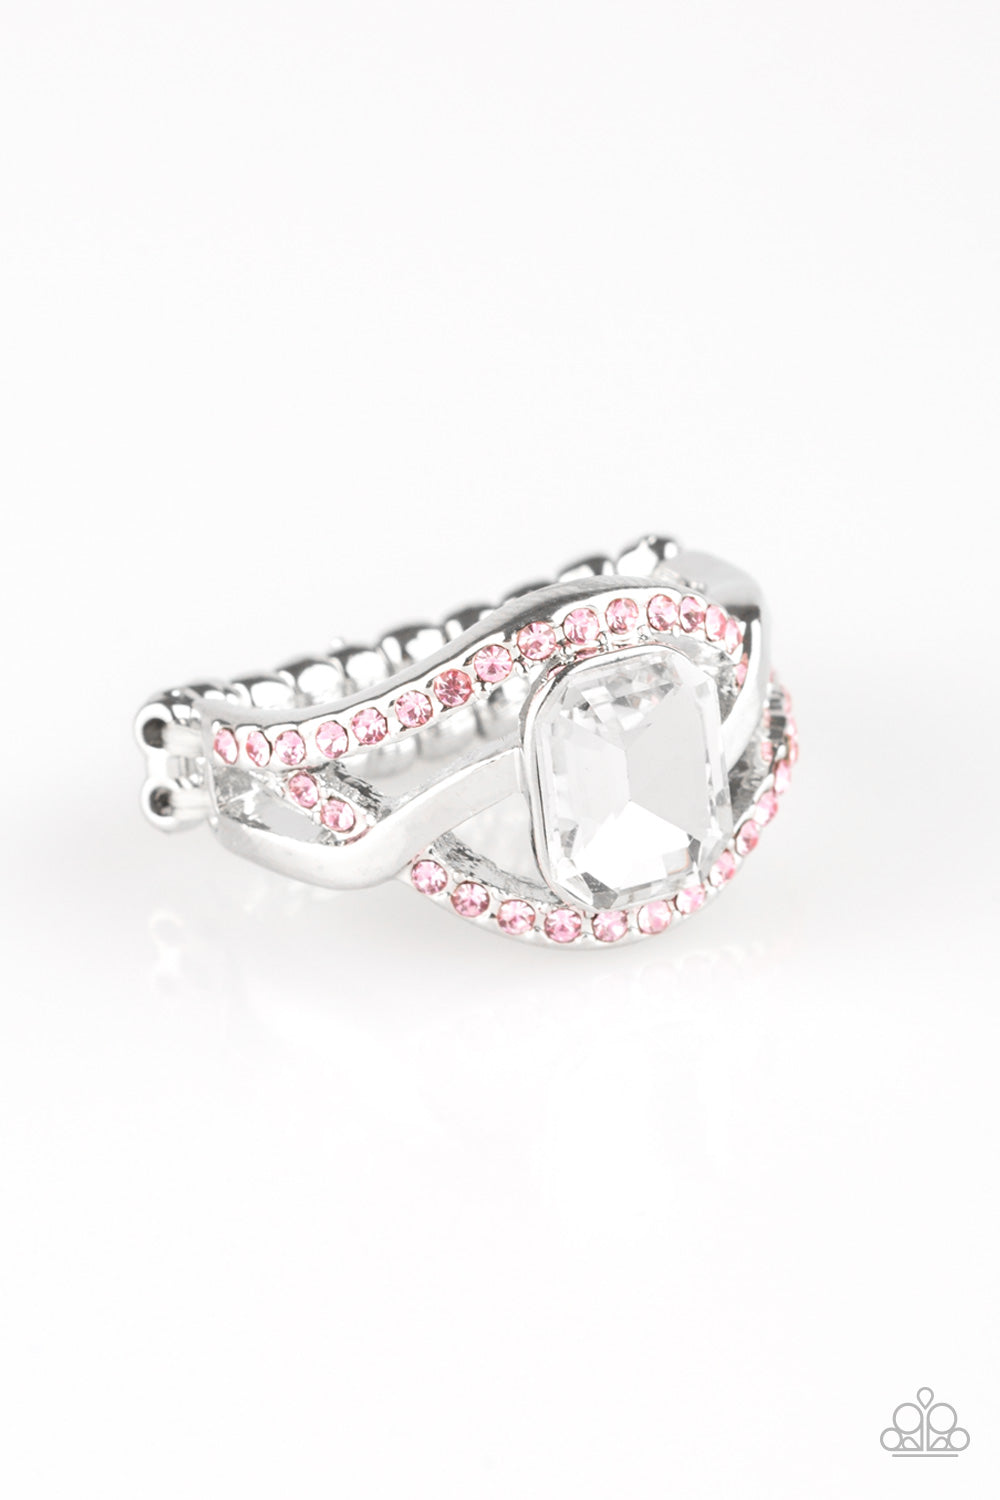 BLING It On! - Pink ring